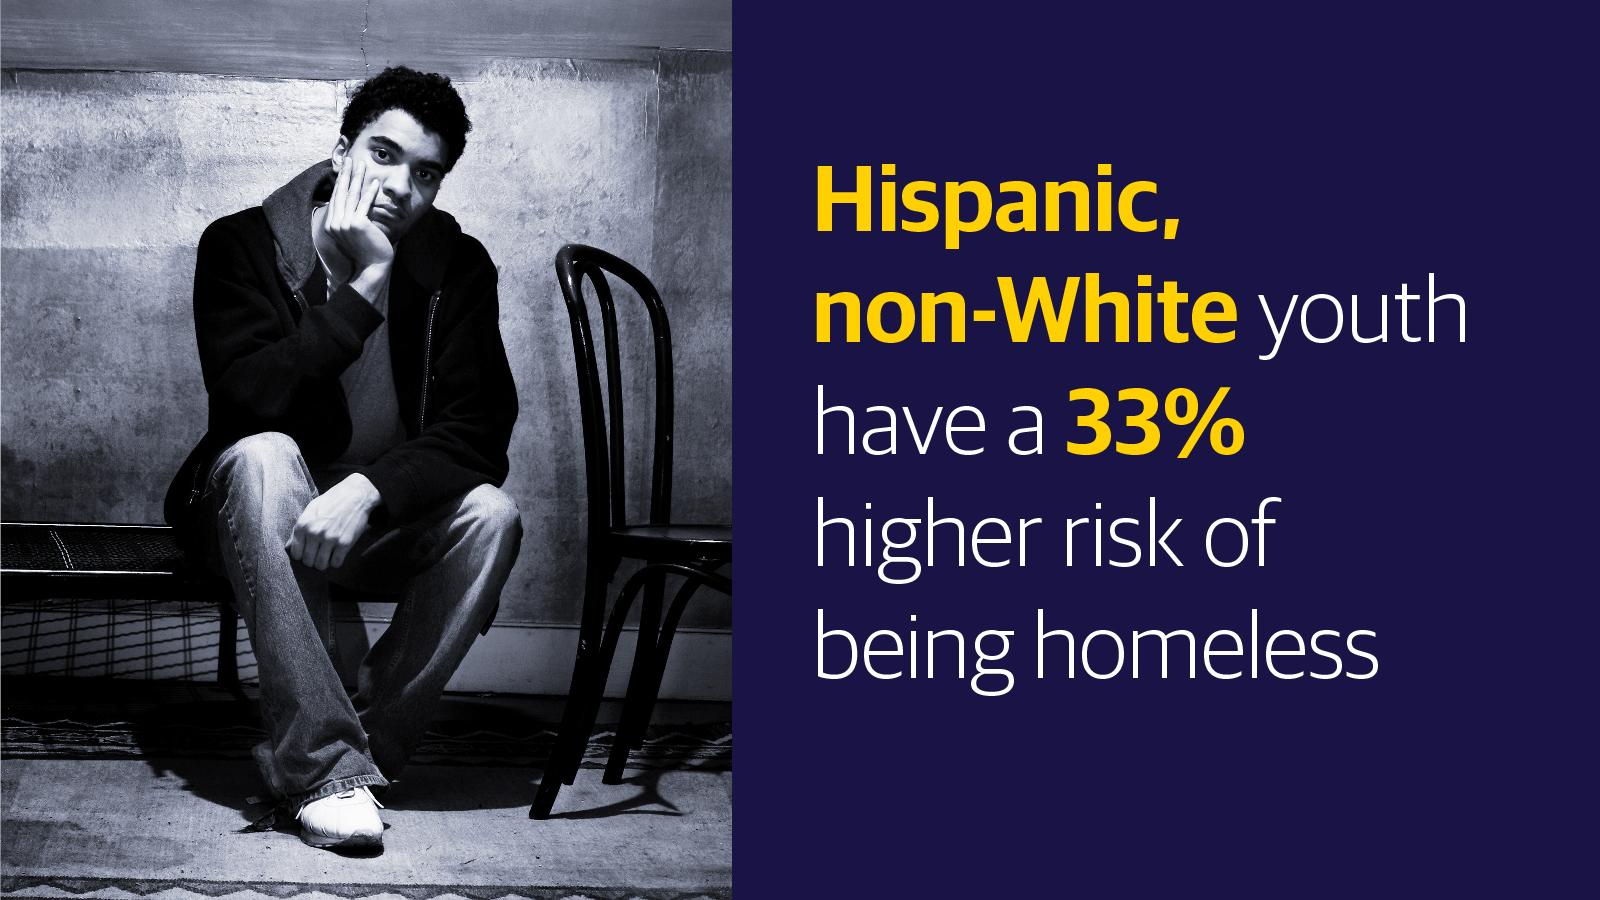 (slide 6 of 9) Hispanic, non-White youth have a 33% higher risk of being homeless. . 